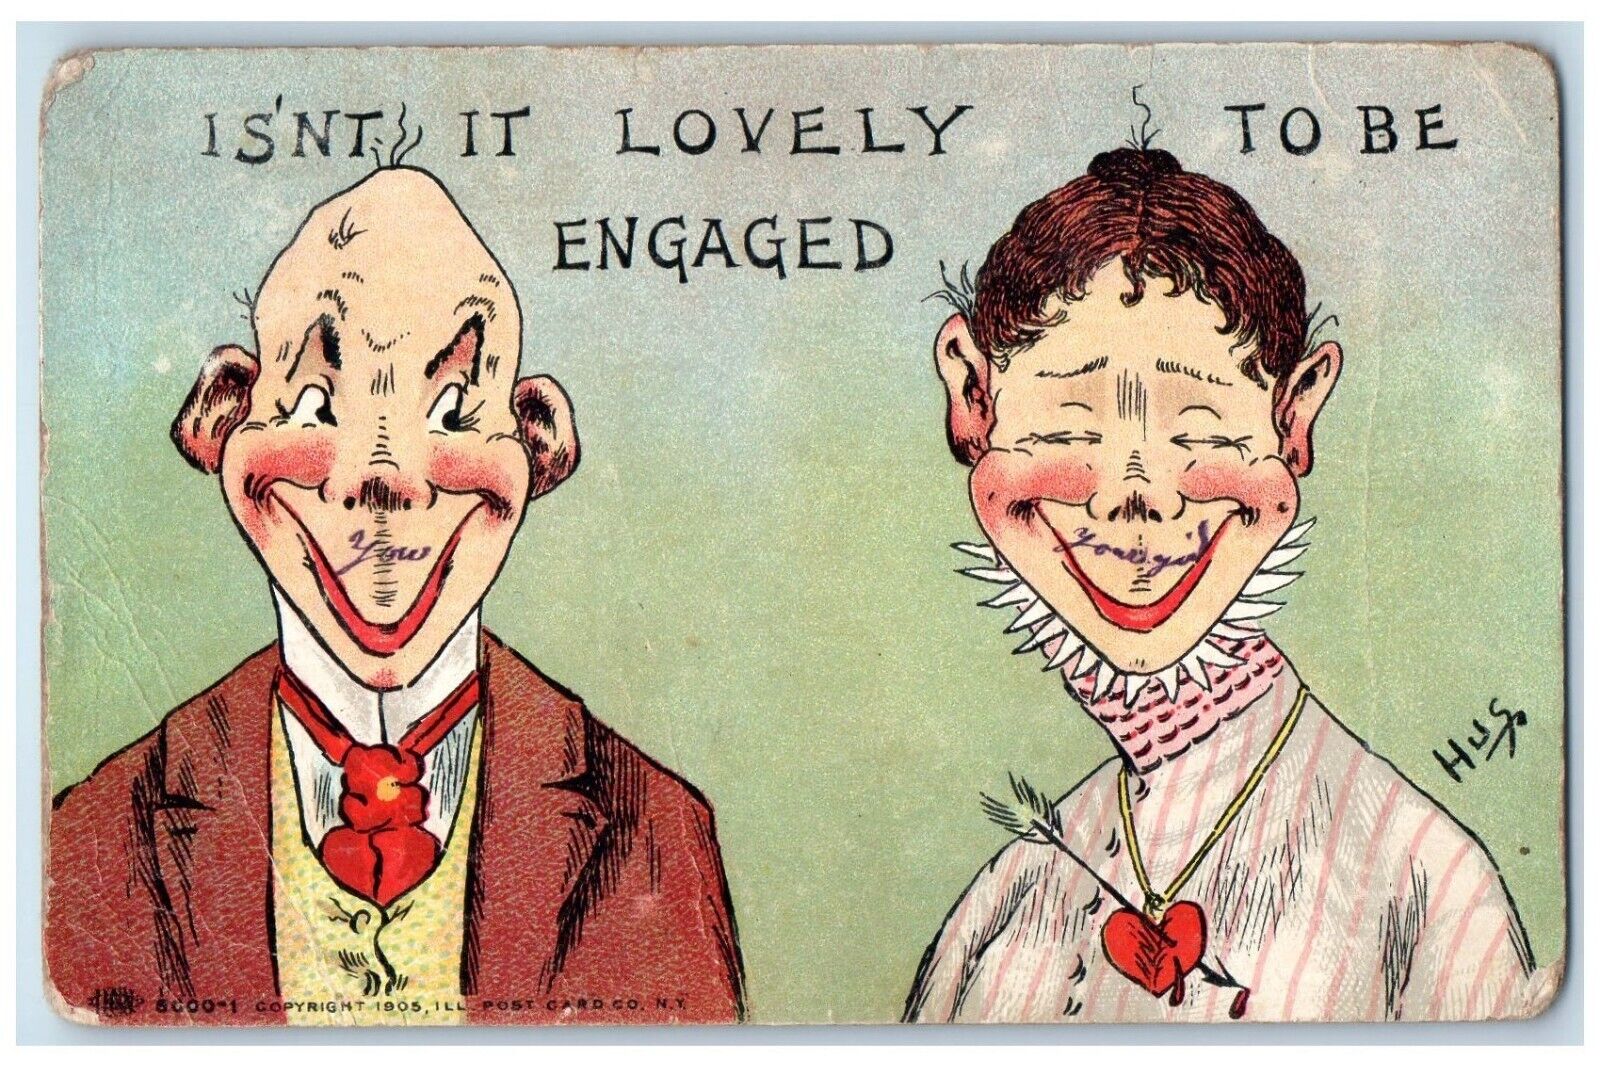 1908 Couple Romance Engagement Lost Nation Iowa IA Posted Antique Postcard